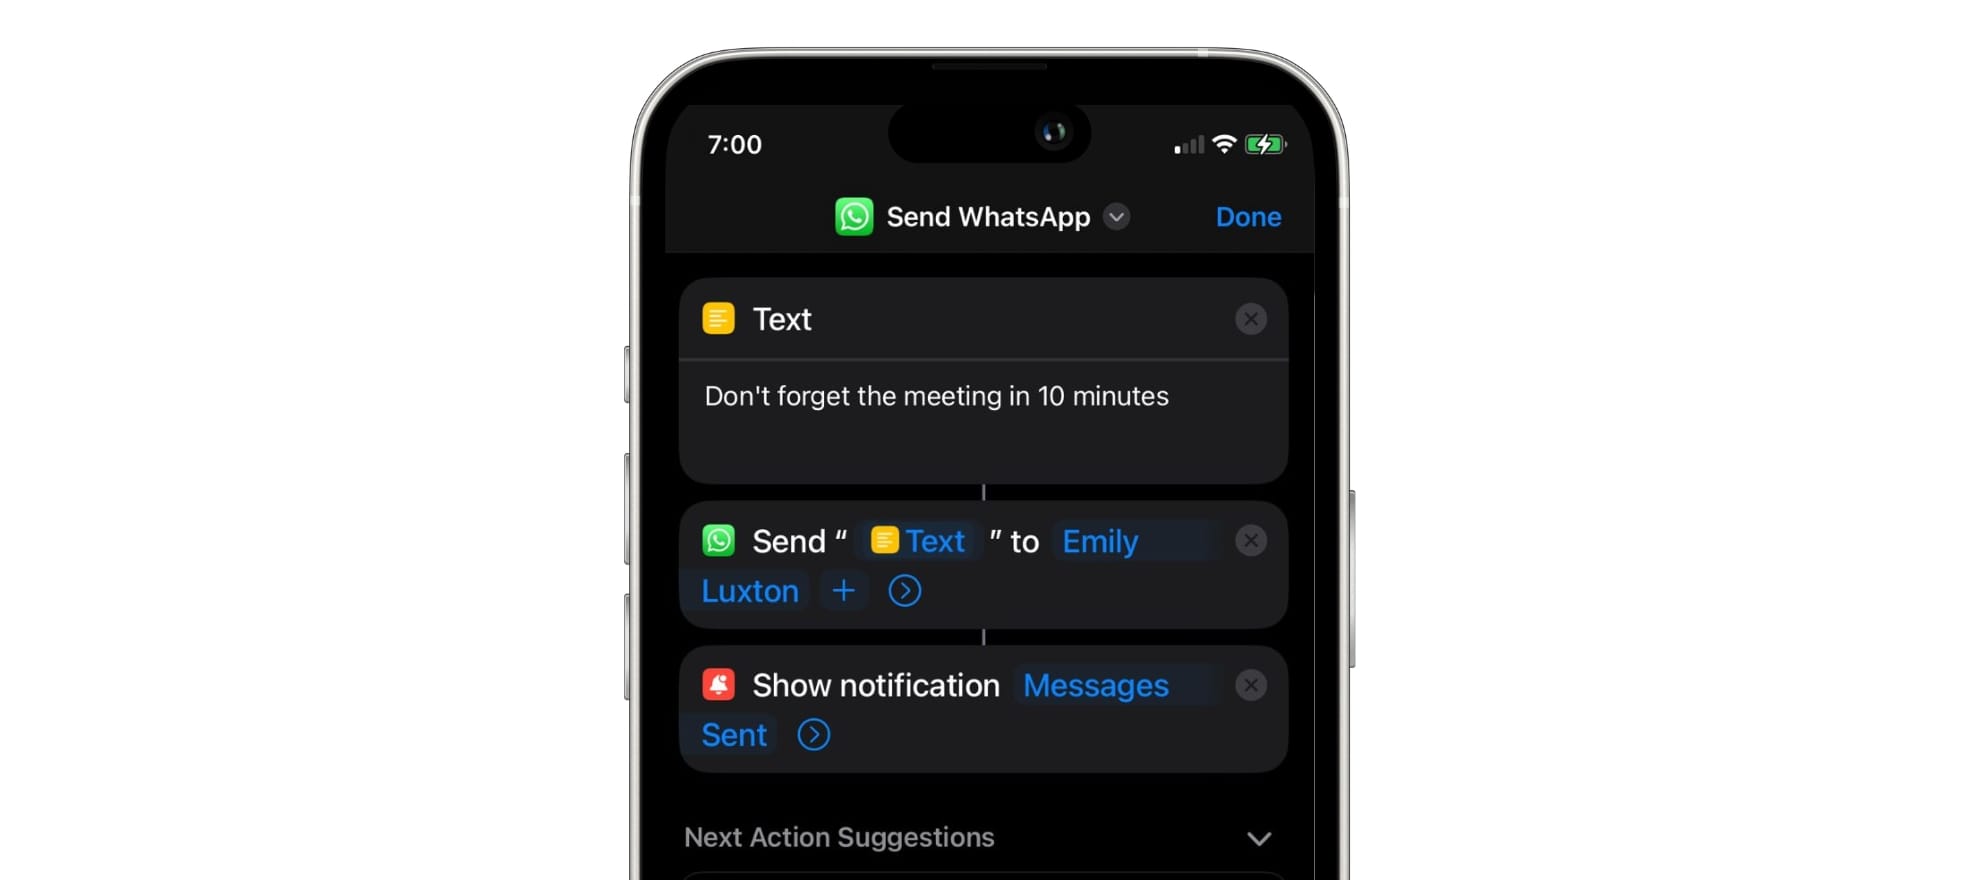 How to Schedule WhatsApp Messages with Shortcuts and Automation on iOS